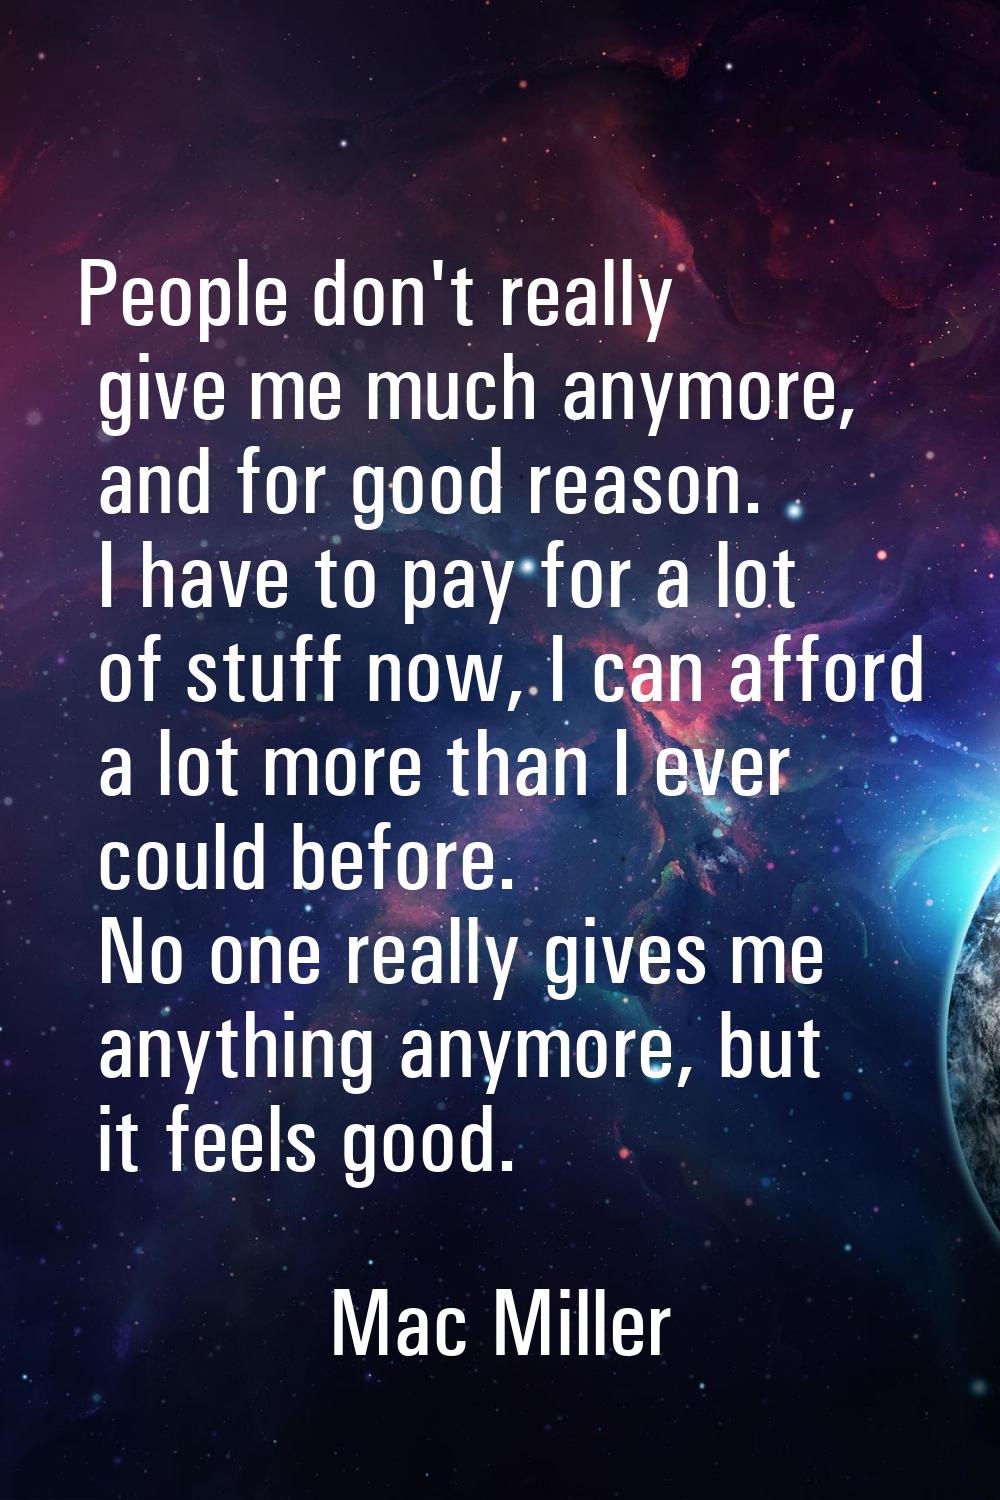 People don't really give me much anymore, and for good reason. I have to pay for a lot of stuff now